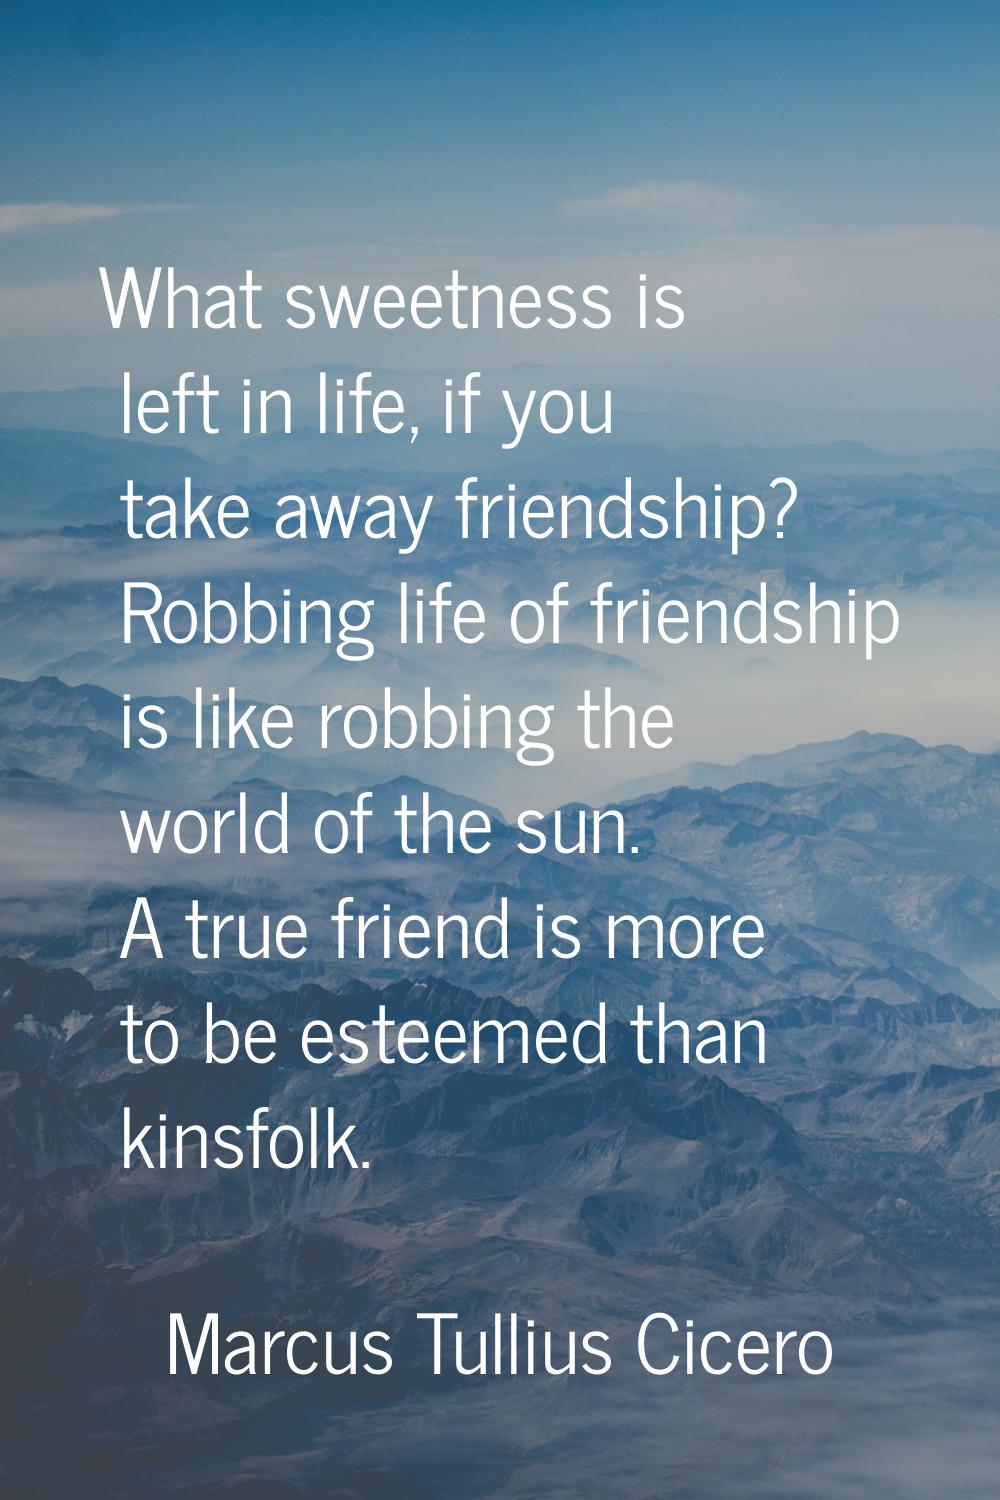 What sweetness is left in life, if you take away friendship? Robbing life of friendship is like rob